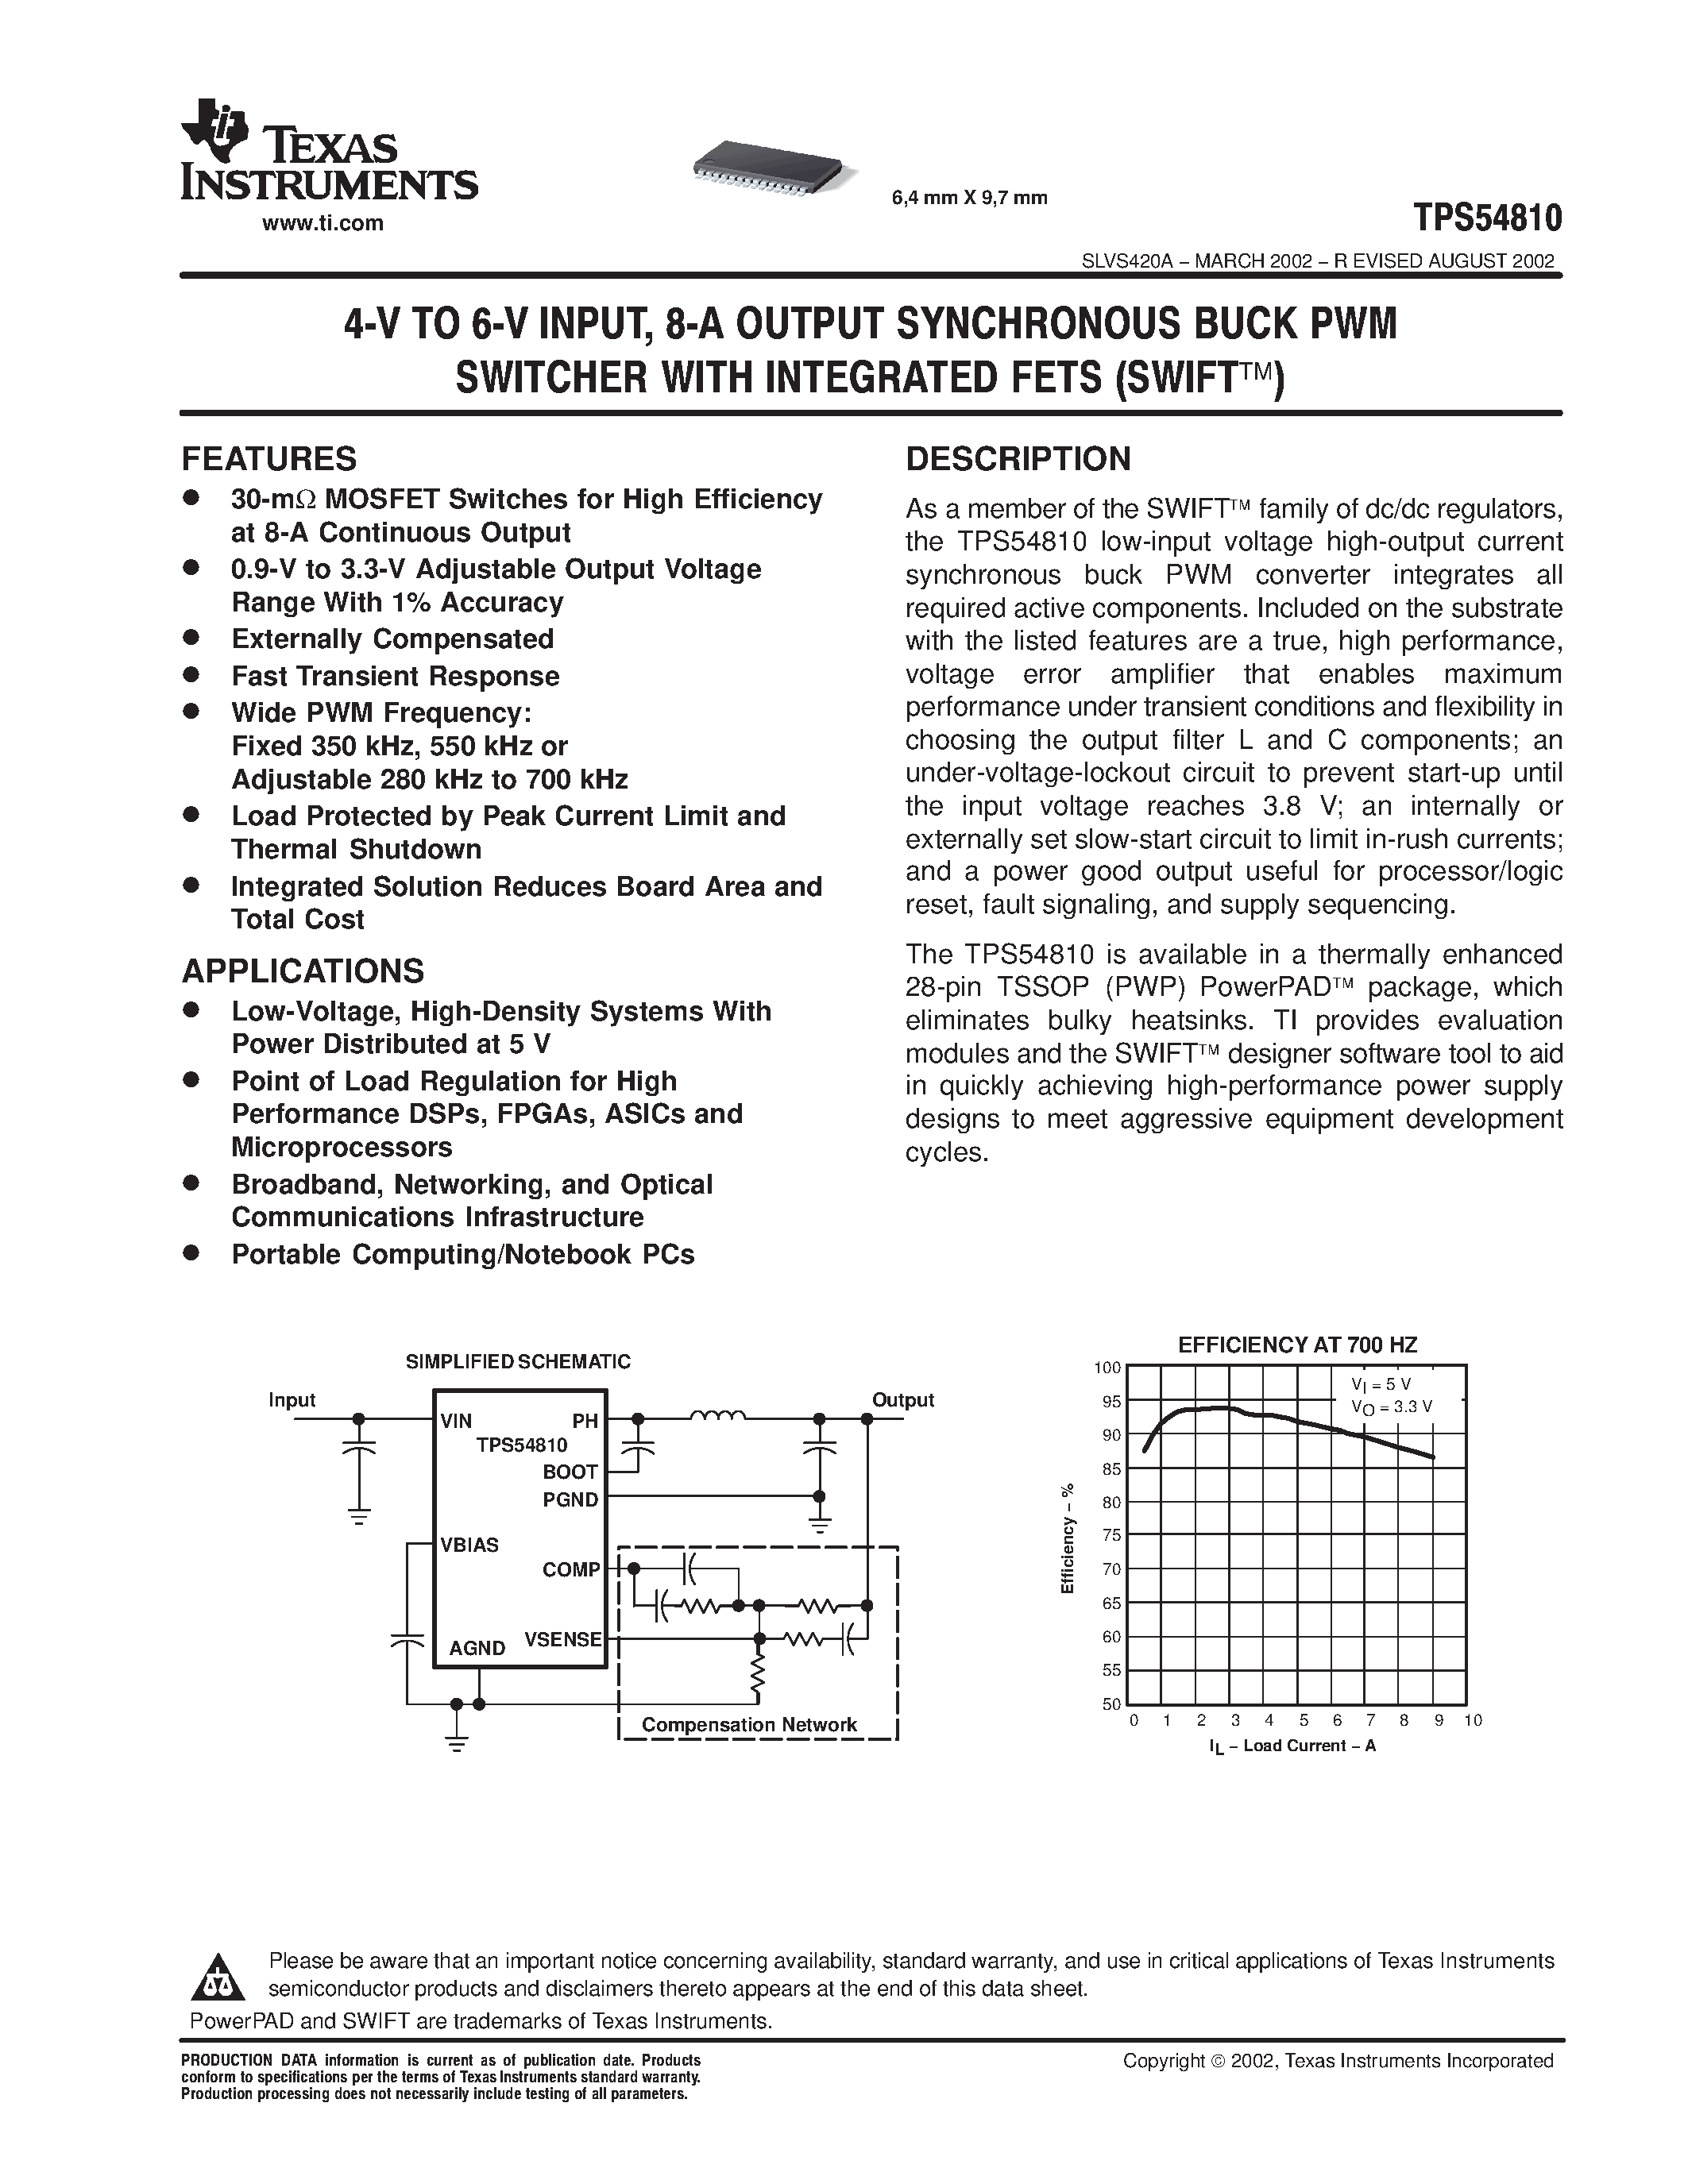 Даташит TPS54910 - 3-V TO 4-V INPUT/ 9-A OUTPUT SYNCHRONOUS BUCK PWM SWITCHER WITH INTEGRATED FETs (SWIFT) страница 1